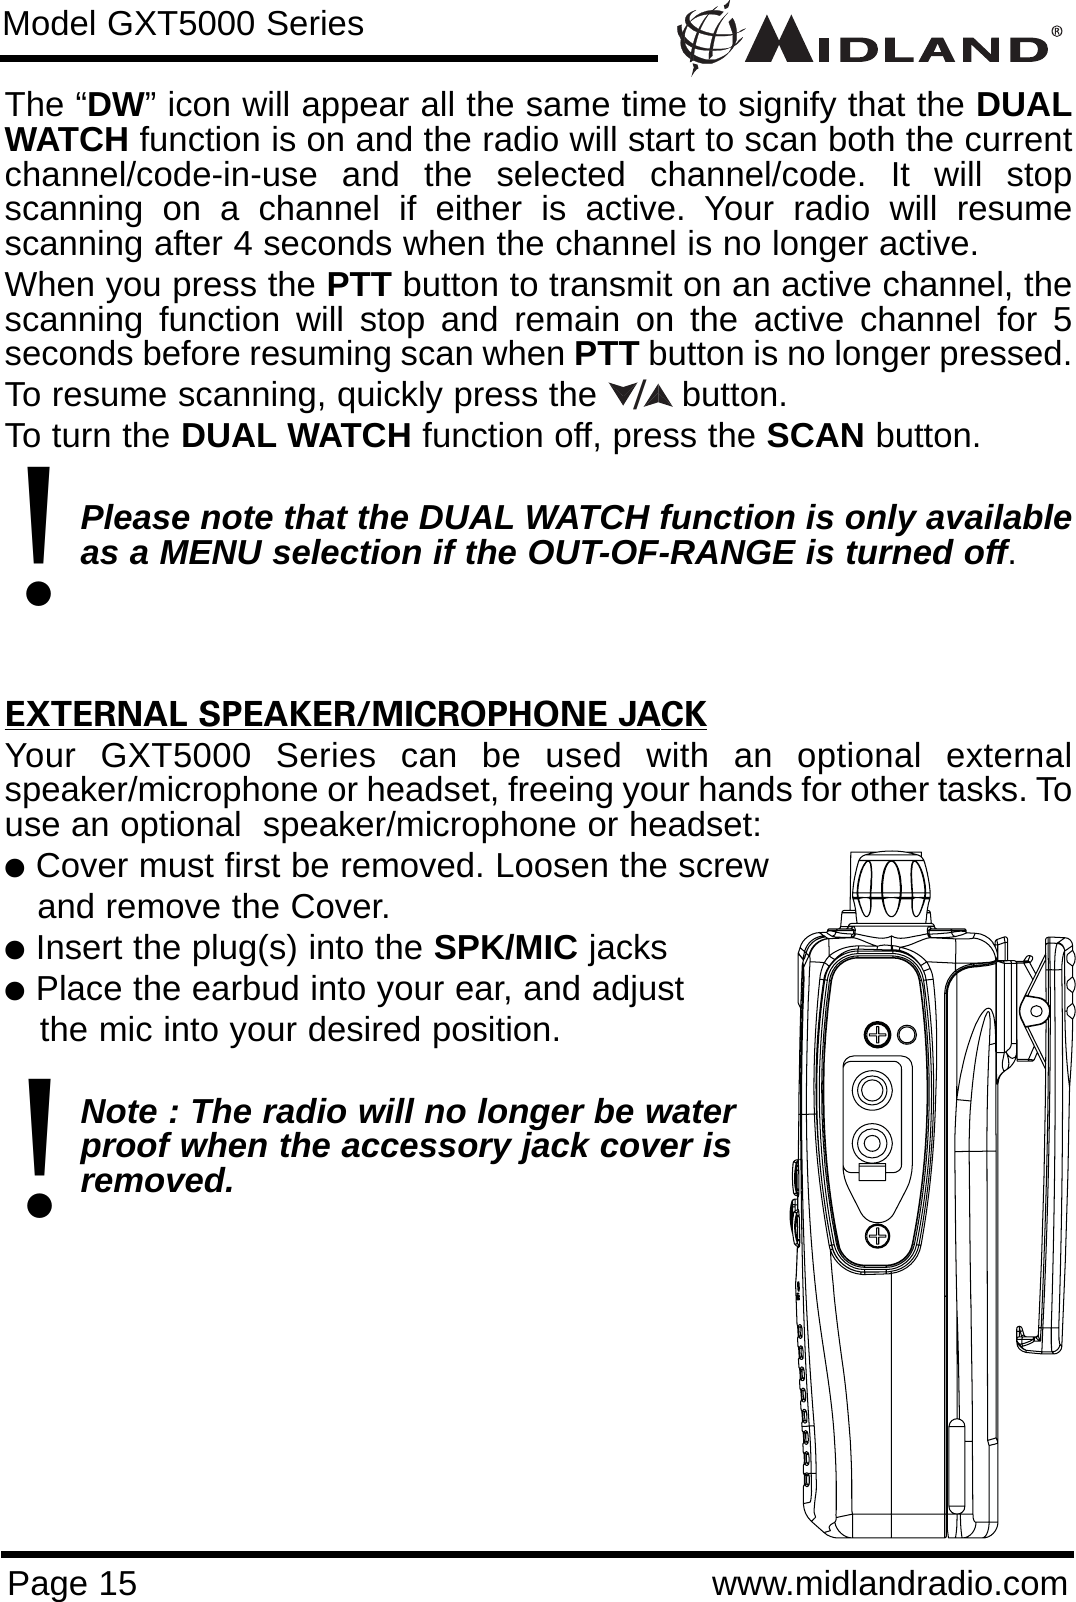 Page 15 www.midlandradio.comThe “DW” icon will appear all the same time to signify that the DUALWATCH function is on and the radio will start to scan both the currentchannel/code-in-use and the selected channel/code. It will stopscanning on a channel if either is active. Your radio will resumescanning after 4 seconds when the channel is no longer active.When you press the PTT button to transmit on an active channel, thescanning function will stop and remain on the active channel for 5seconds before resuming scan when PTT button is no longer pressed. To resume scanning, quickly press the  button.To turn the DUAL WATCH function off, press the SCAN button. Please note that the DUAL WATCH function is only availableas a MENU selection if the OUT-OF-RANGE is turned off. EXTERNAL SPEAKER/MICROPHONE JACKYour GXT5000 Series can be used with an optional externalspeaker/microphone or headset, freeing your hands for other tasks. Touse an optional  speaker/microphone or headset:lCover must first be removed. Loosen the screwand remove the Cover.lInsert the plug(s) into the SPK/MIC jackslPlace the earbud into your ear, and adjust the mic into your desired position.Note : The radio will no longer be waterproof when the accessory jack cover is removed.Model GXT5000 Series/!!